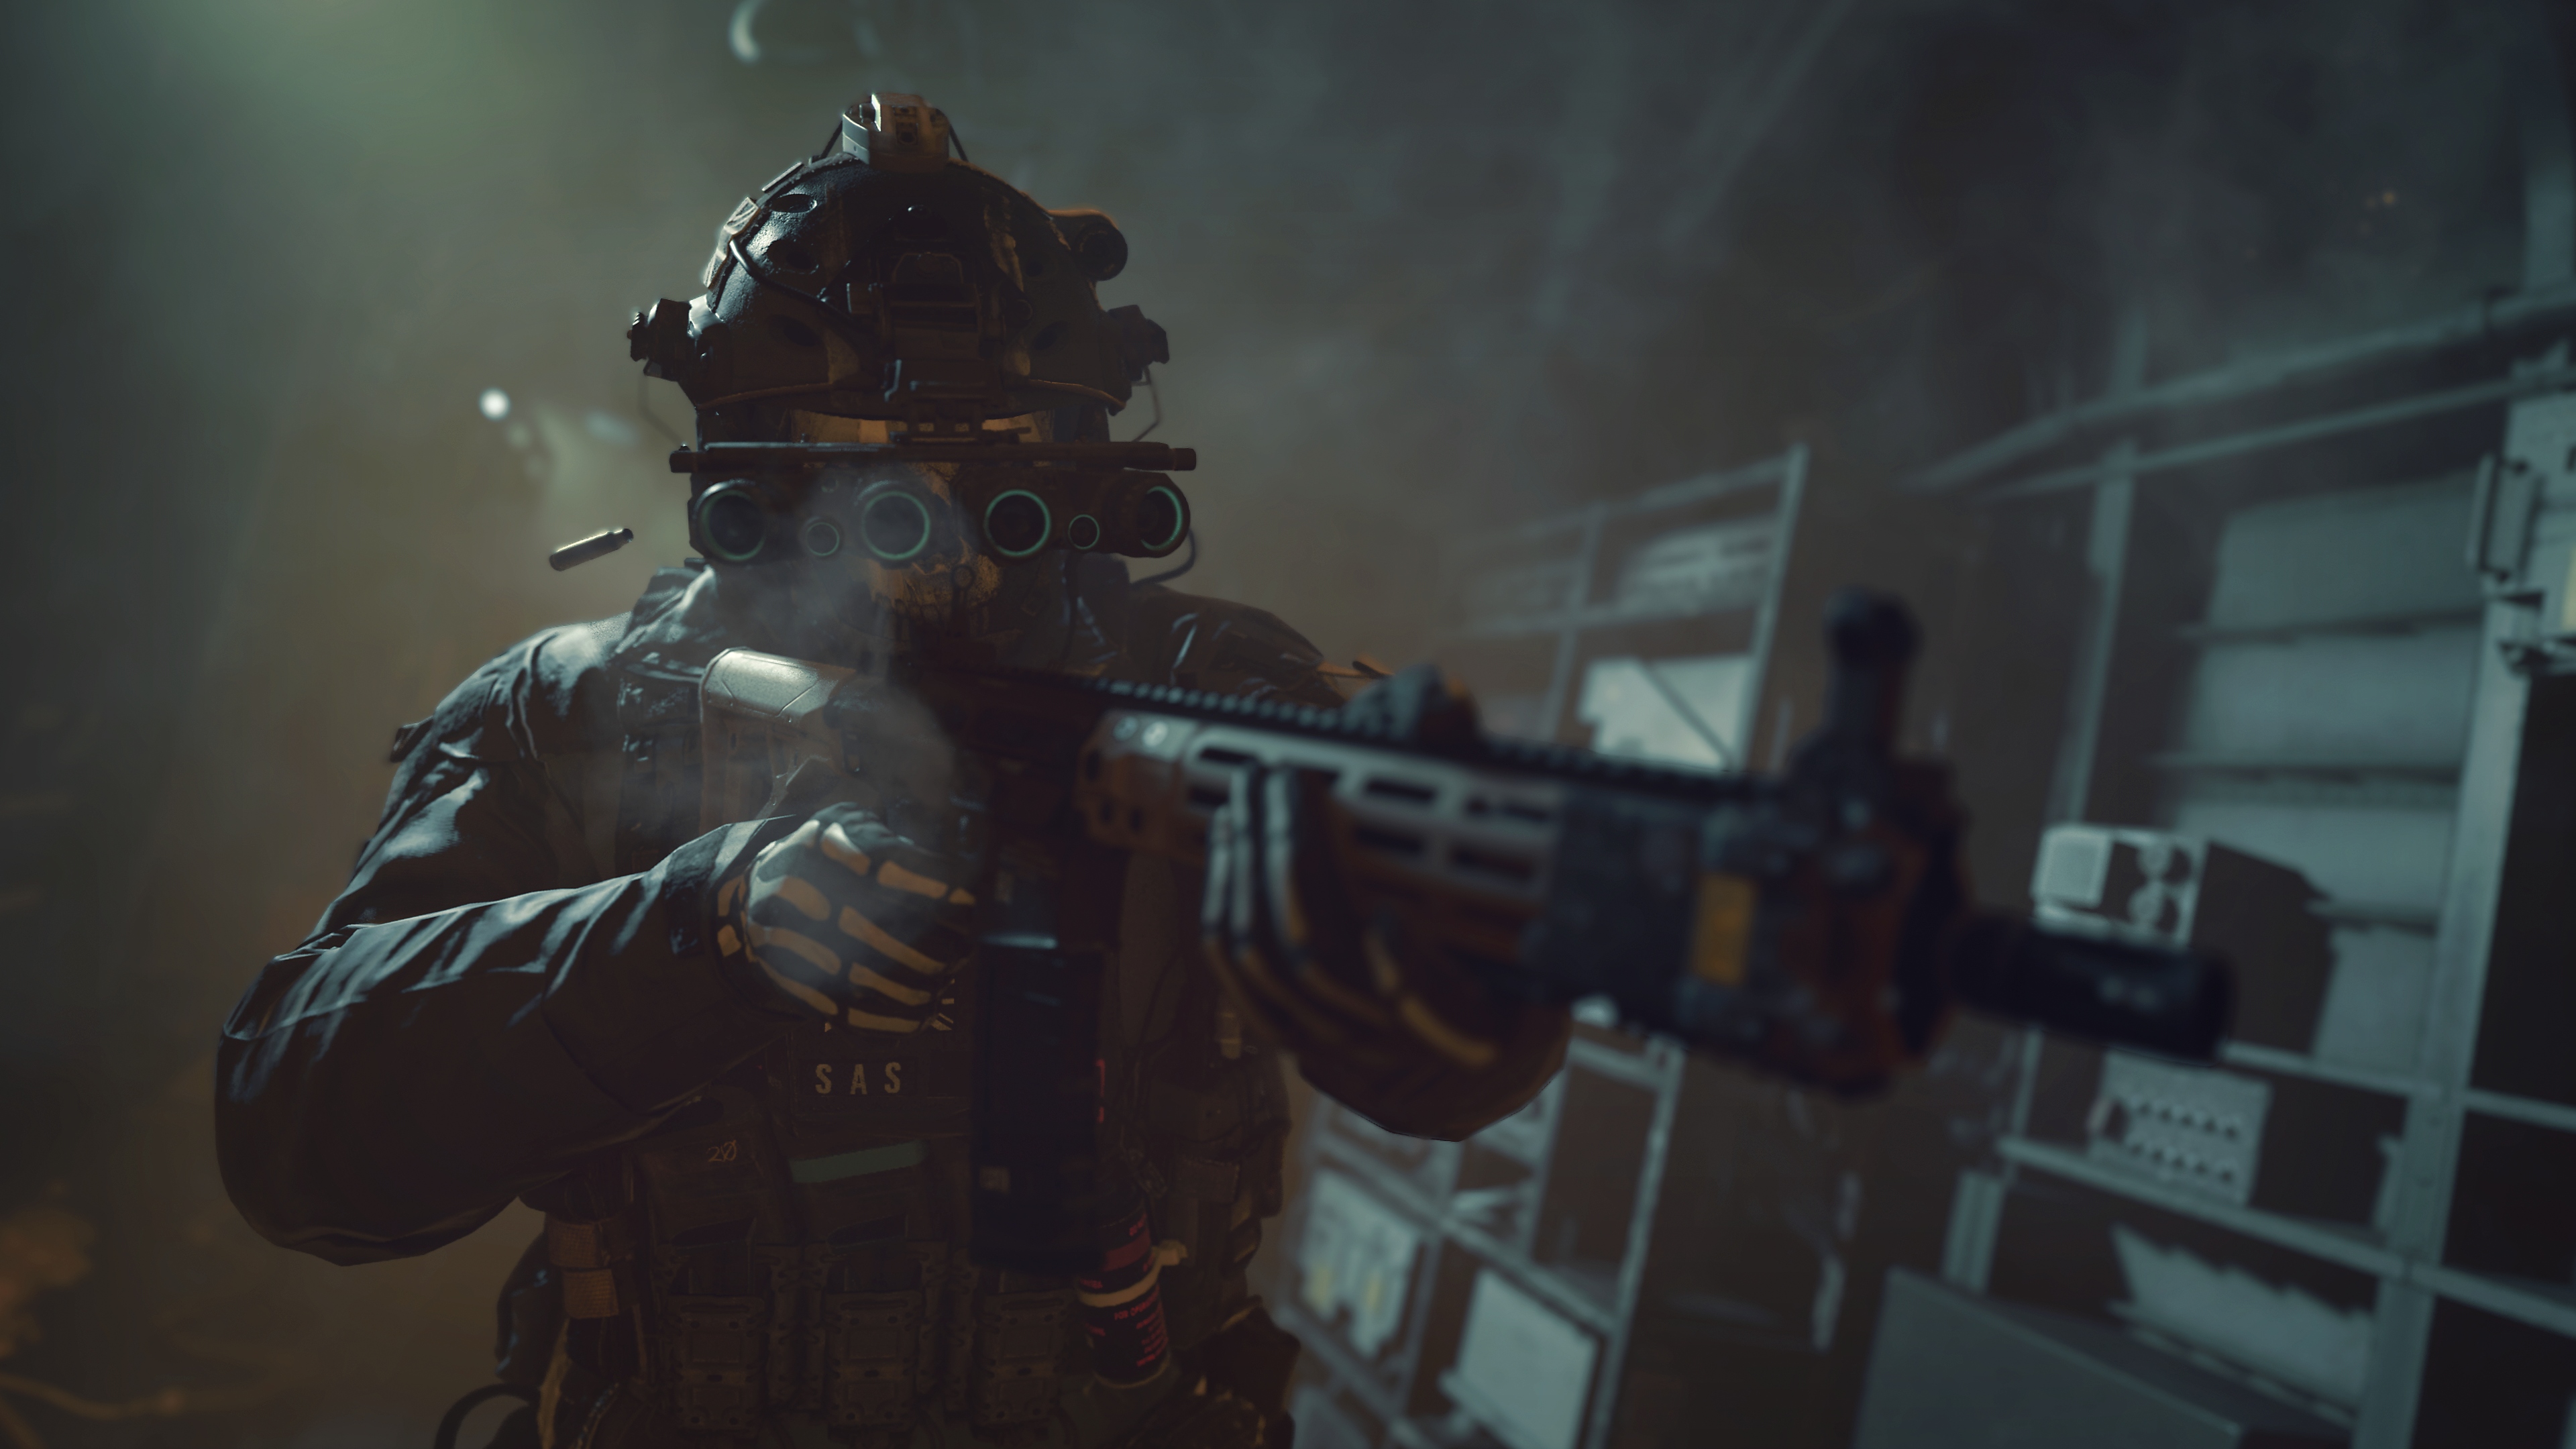 Call of Duty: Modern Warfare 2 2022 screenshot showing a character aiming a weapon while wearing night vision goggles